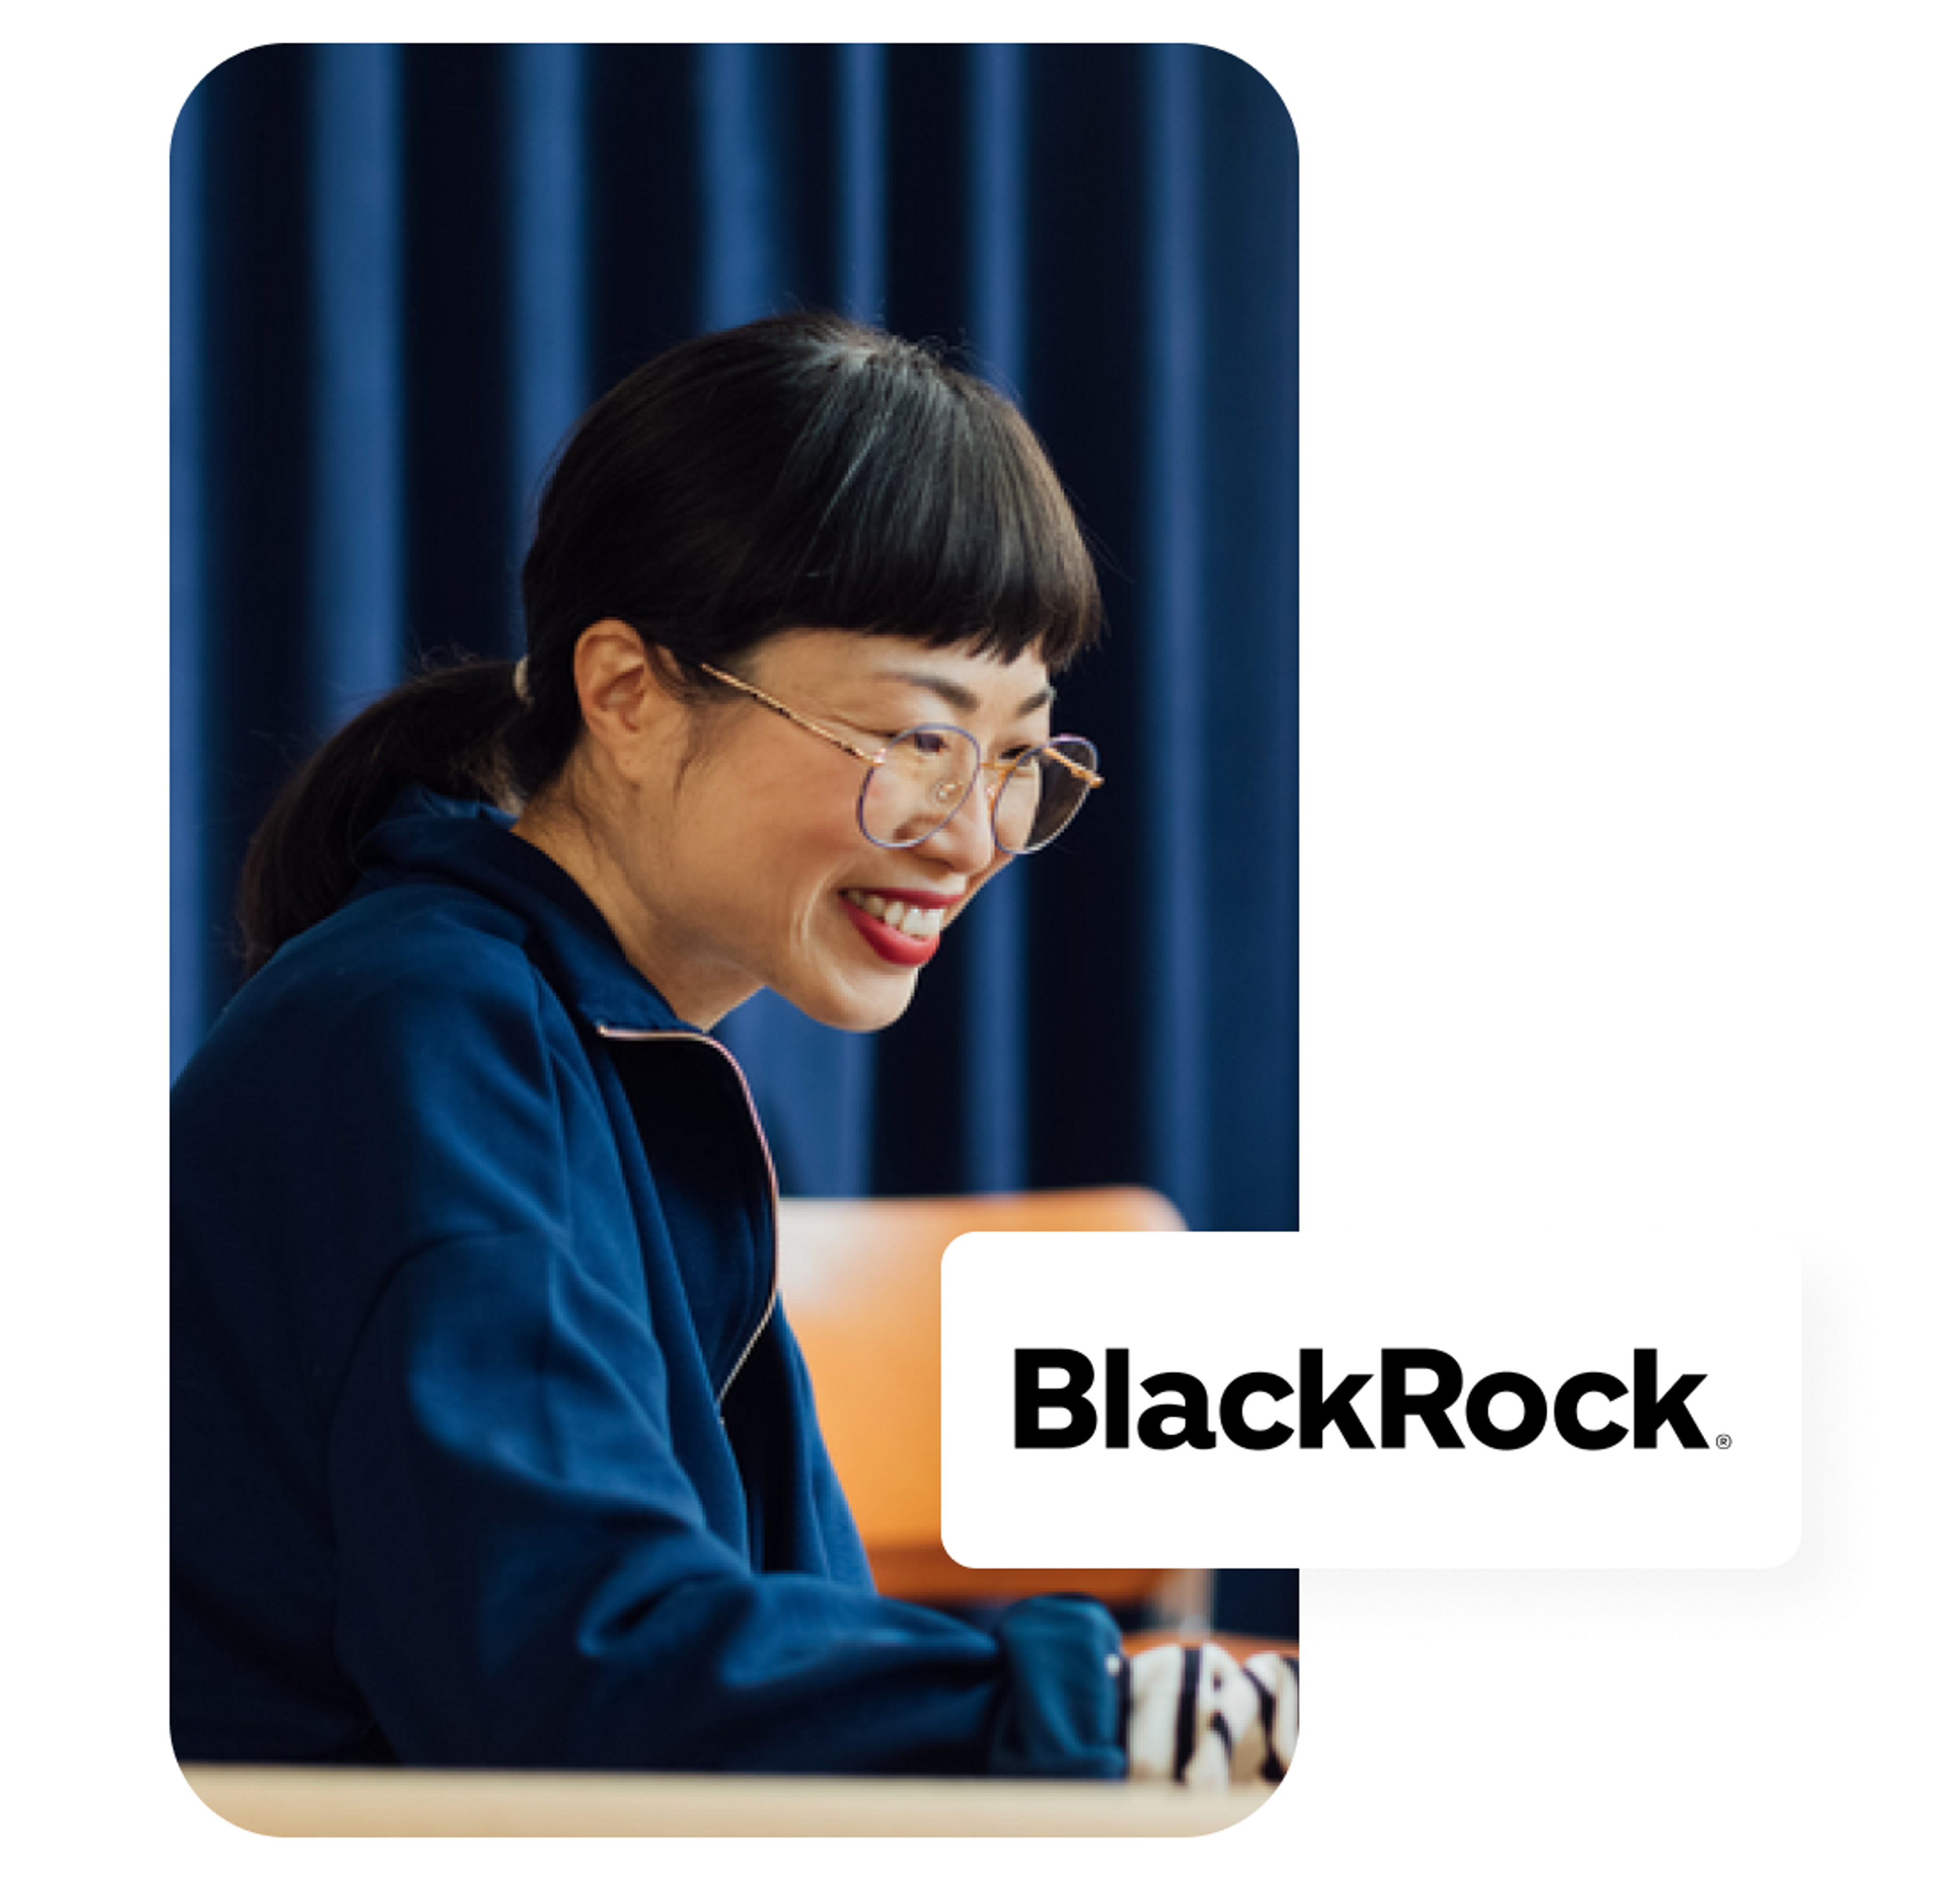 A photo of a smiling woman looking down at a laptop and the BlackRock logo